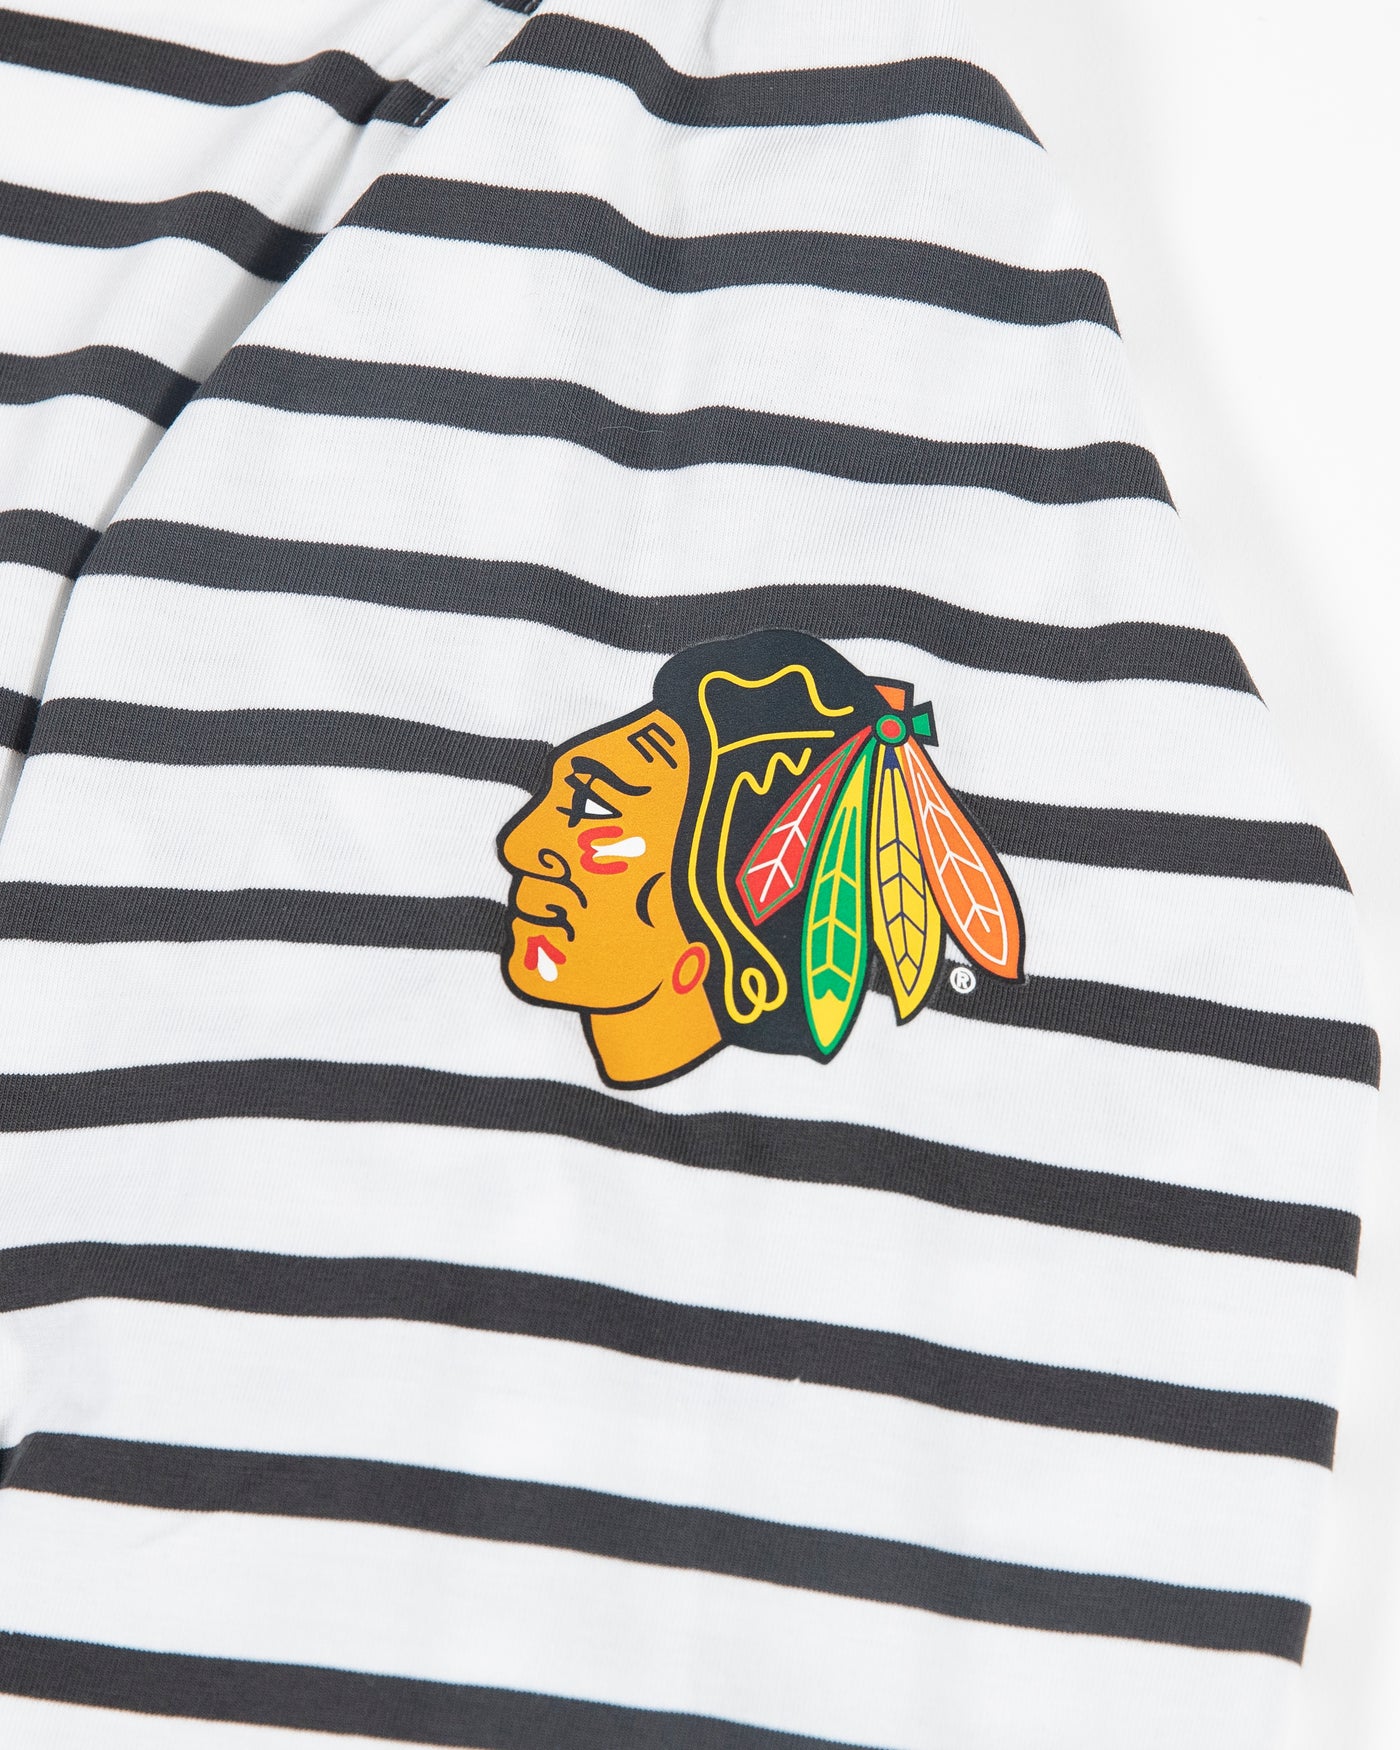 black and white striped lululemon long sleeve tee with Chicago Blackhawks primary logo on left shoulder - detail lay flat